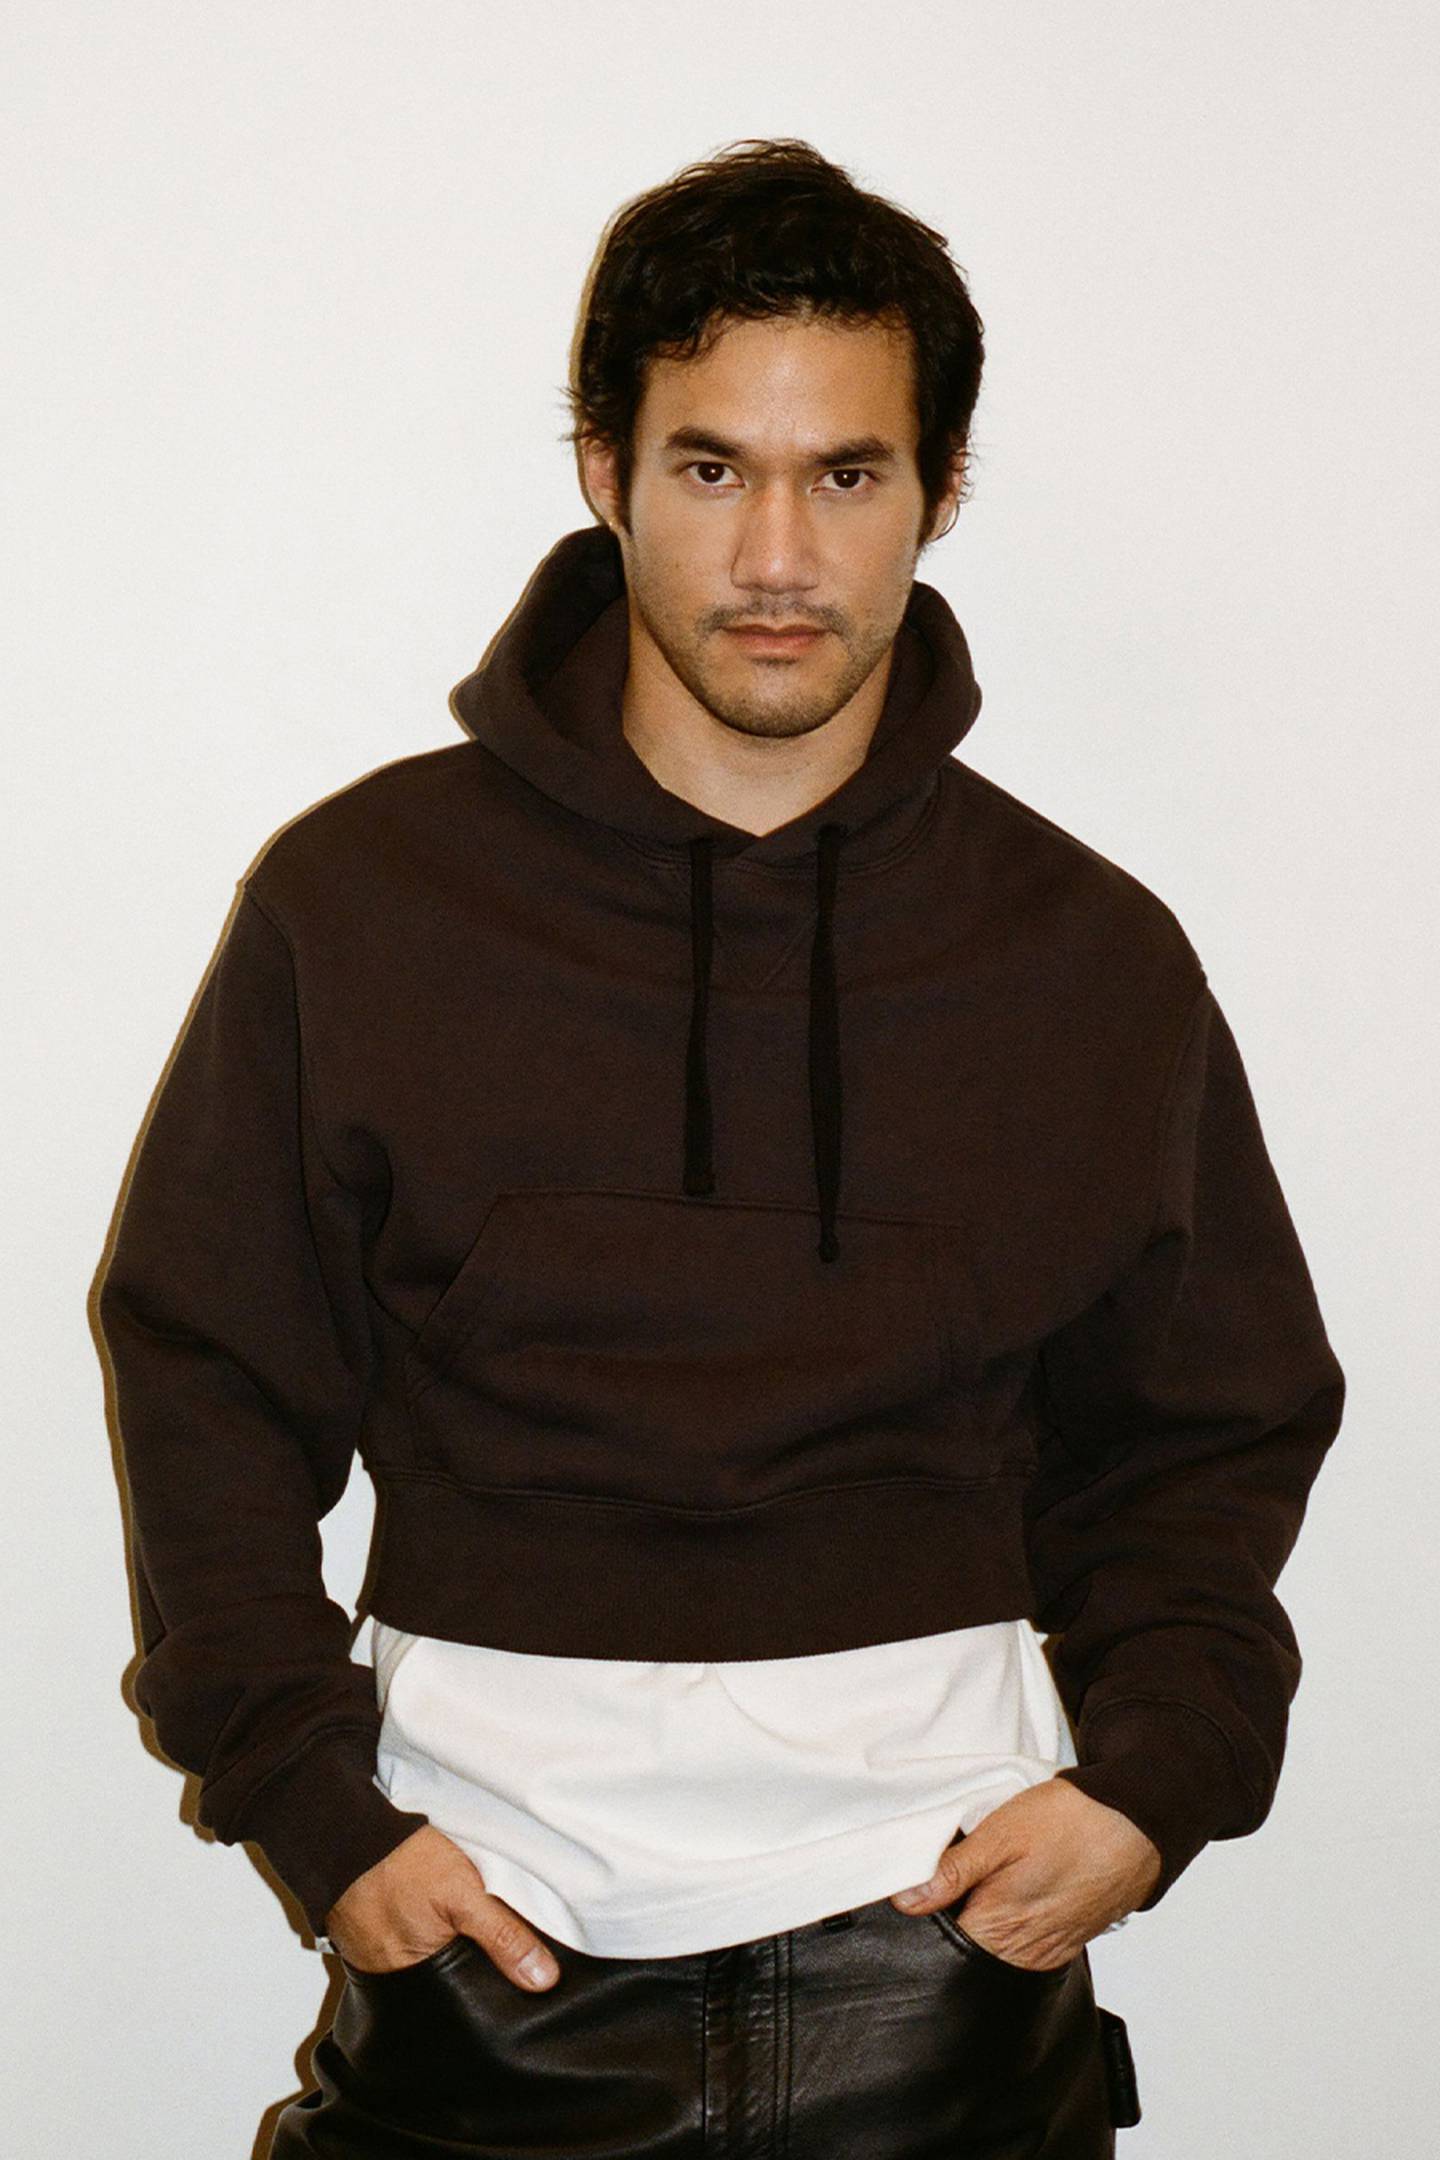 Since his split with Kering in October 2020, Joseph Altuzarra has launched home and Altu, a more casual, affordable collection.